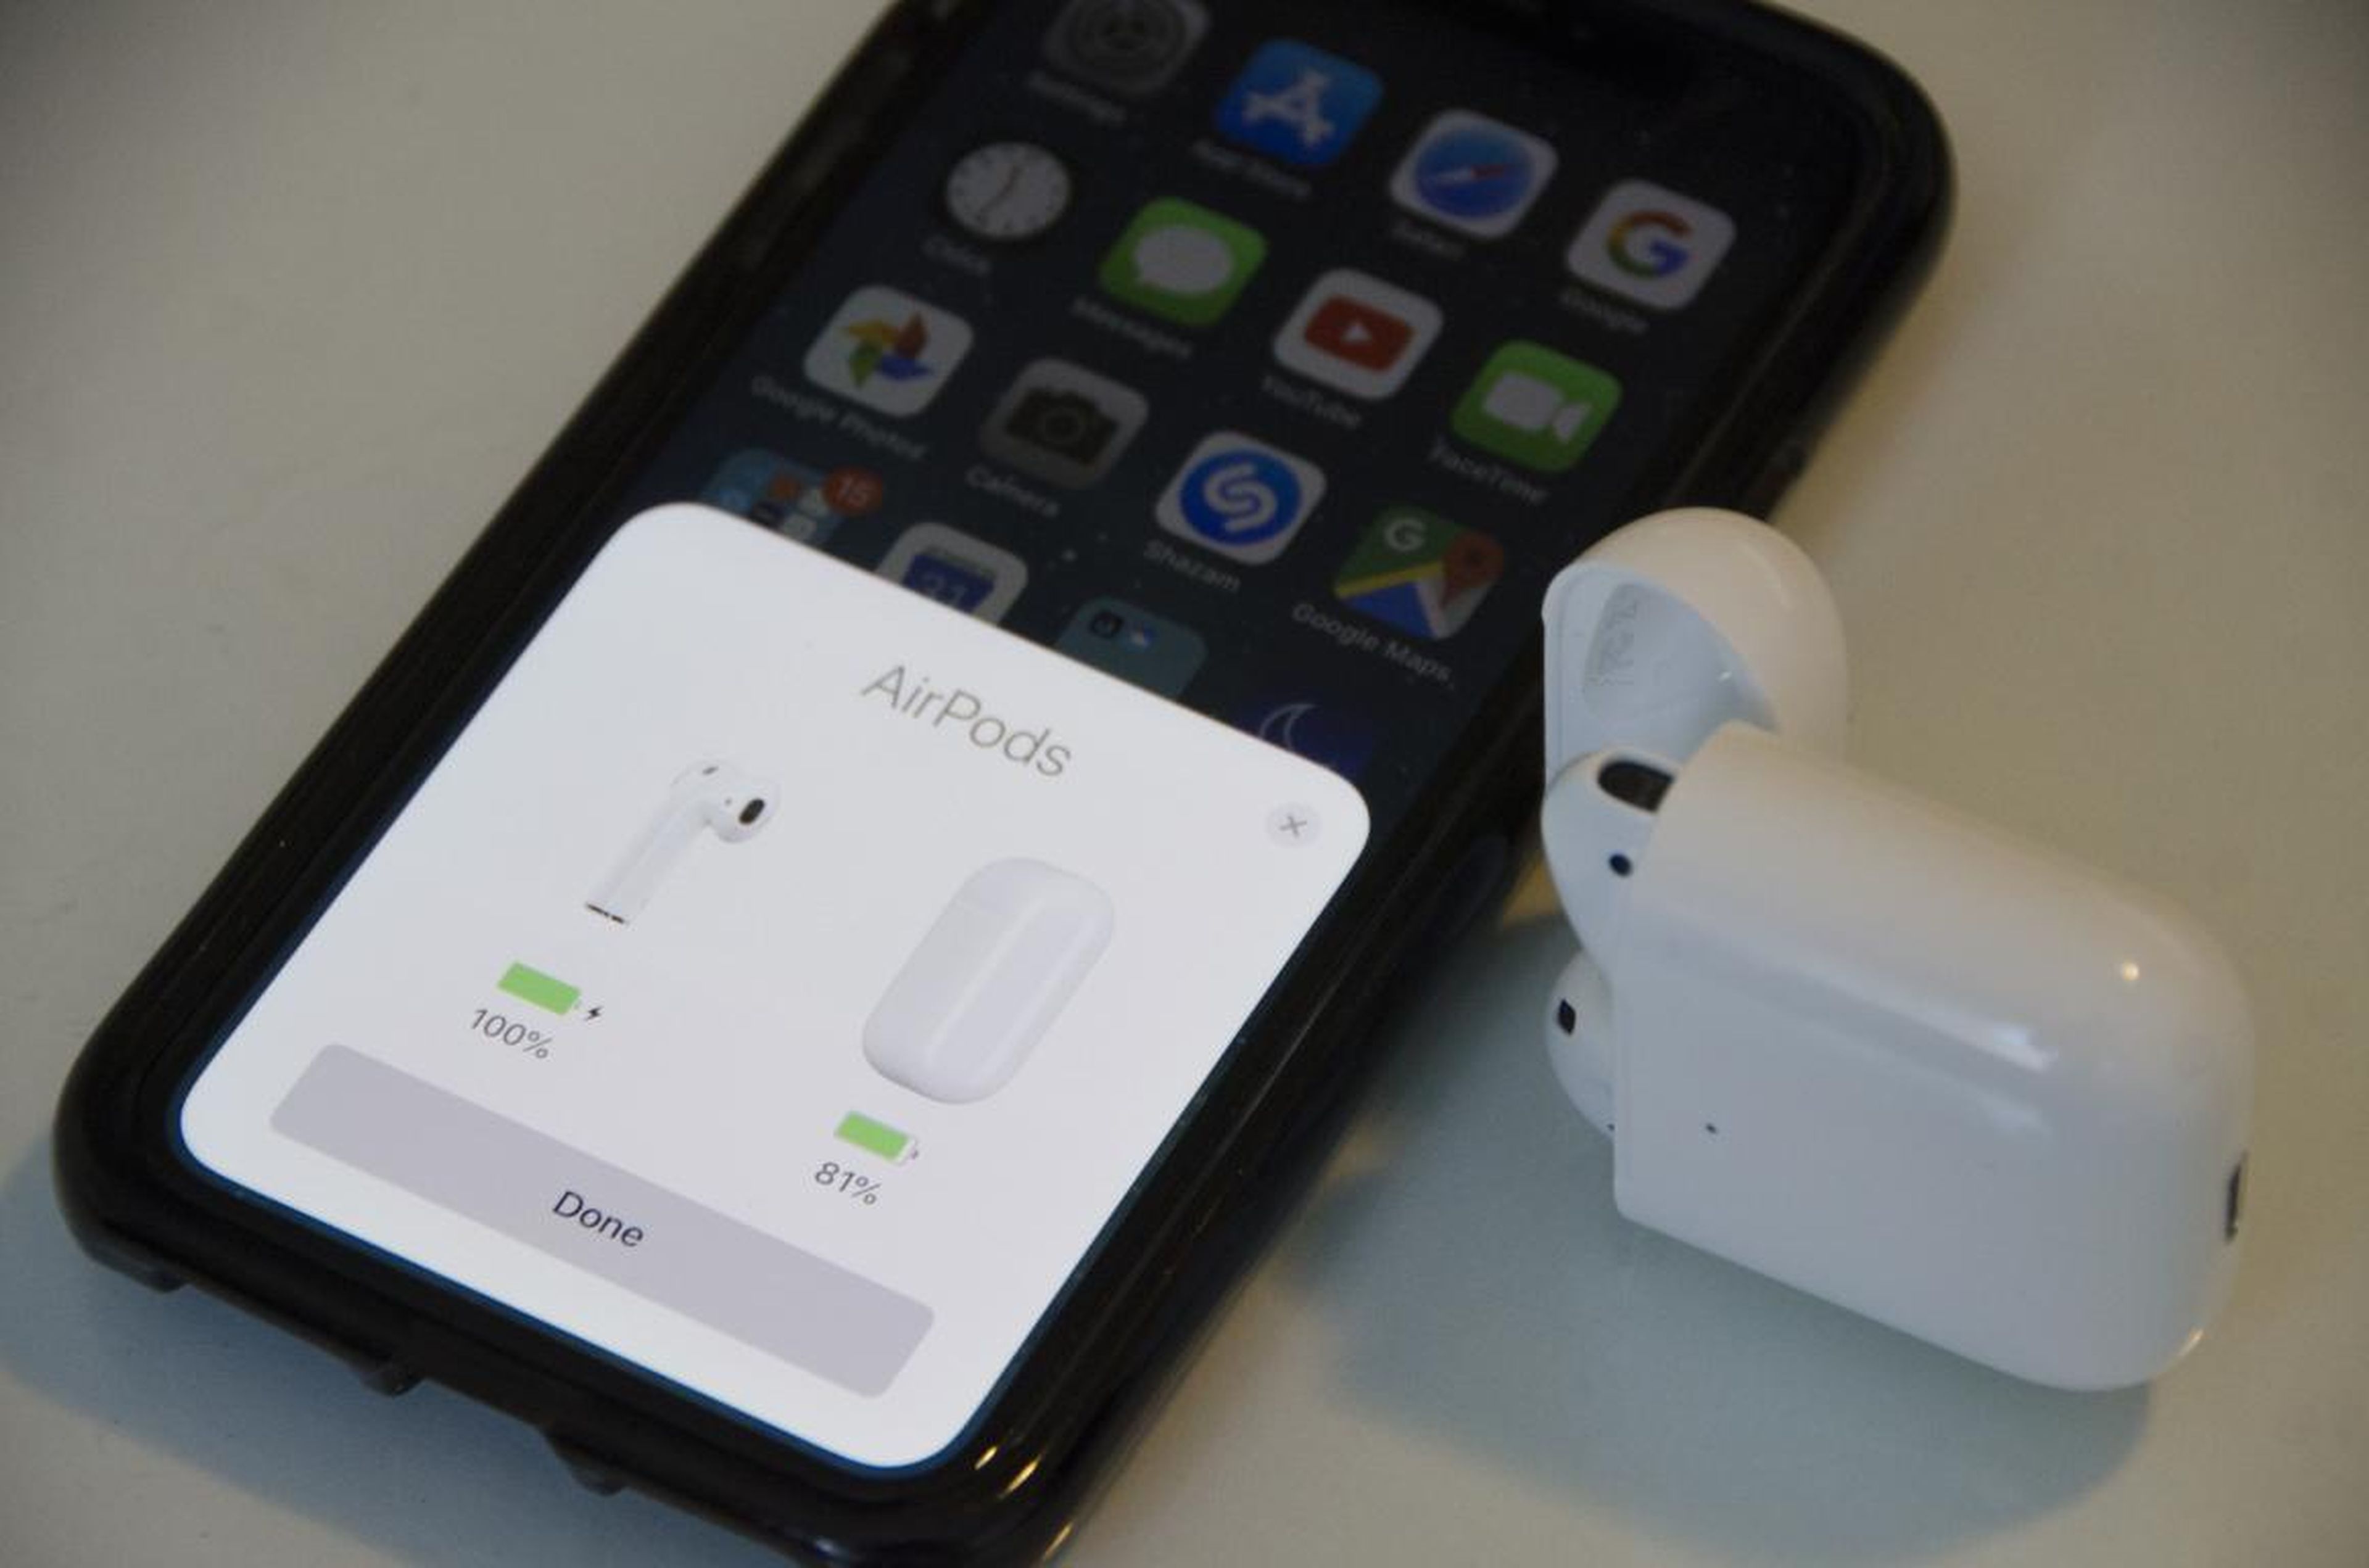 Your new AirPods will pair with your phone with just a tap when you open the case near your phone for the first time.